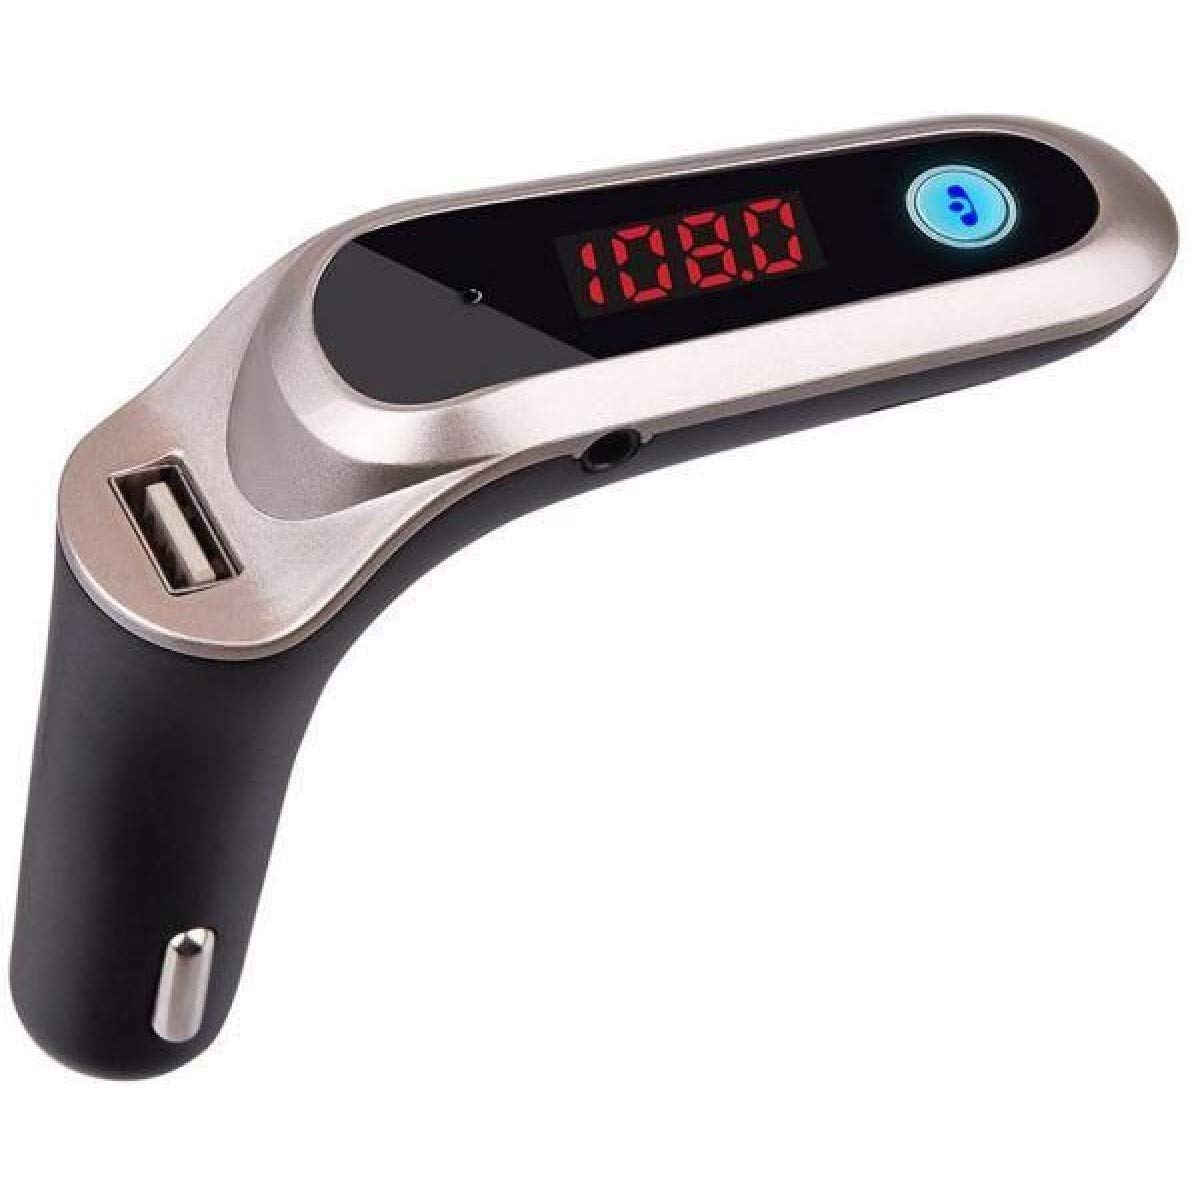 CAR FM TRANSMITTER G6+BLUETOOTH + USB + AUX + SD + REMOTE + LCD SCREEN, Media Players Accessories